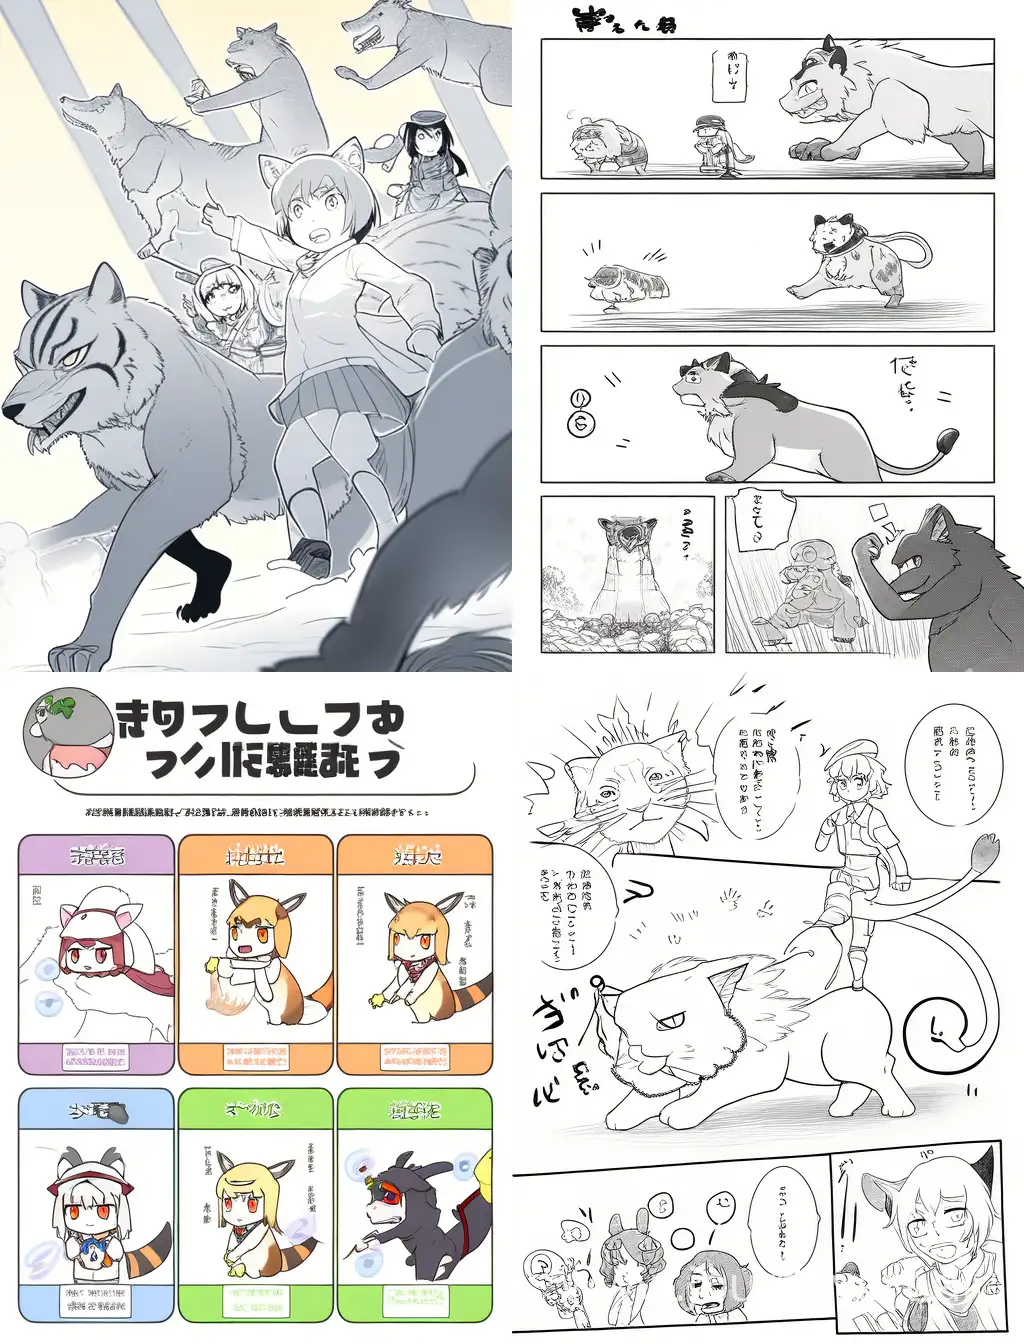 Engaging-English-Language-Exercise-Exploring-Animals-with-Niji-4-in-a-34-Aspect-Ratio